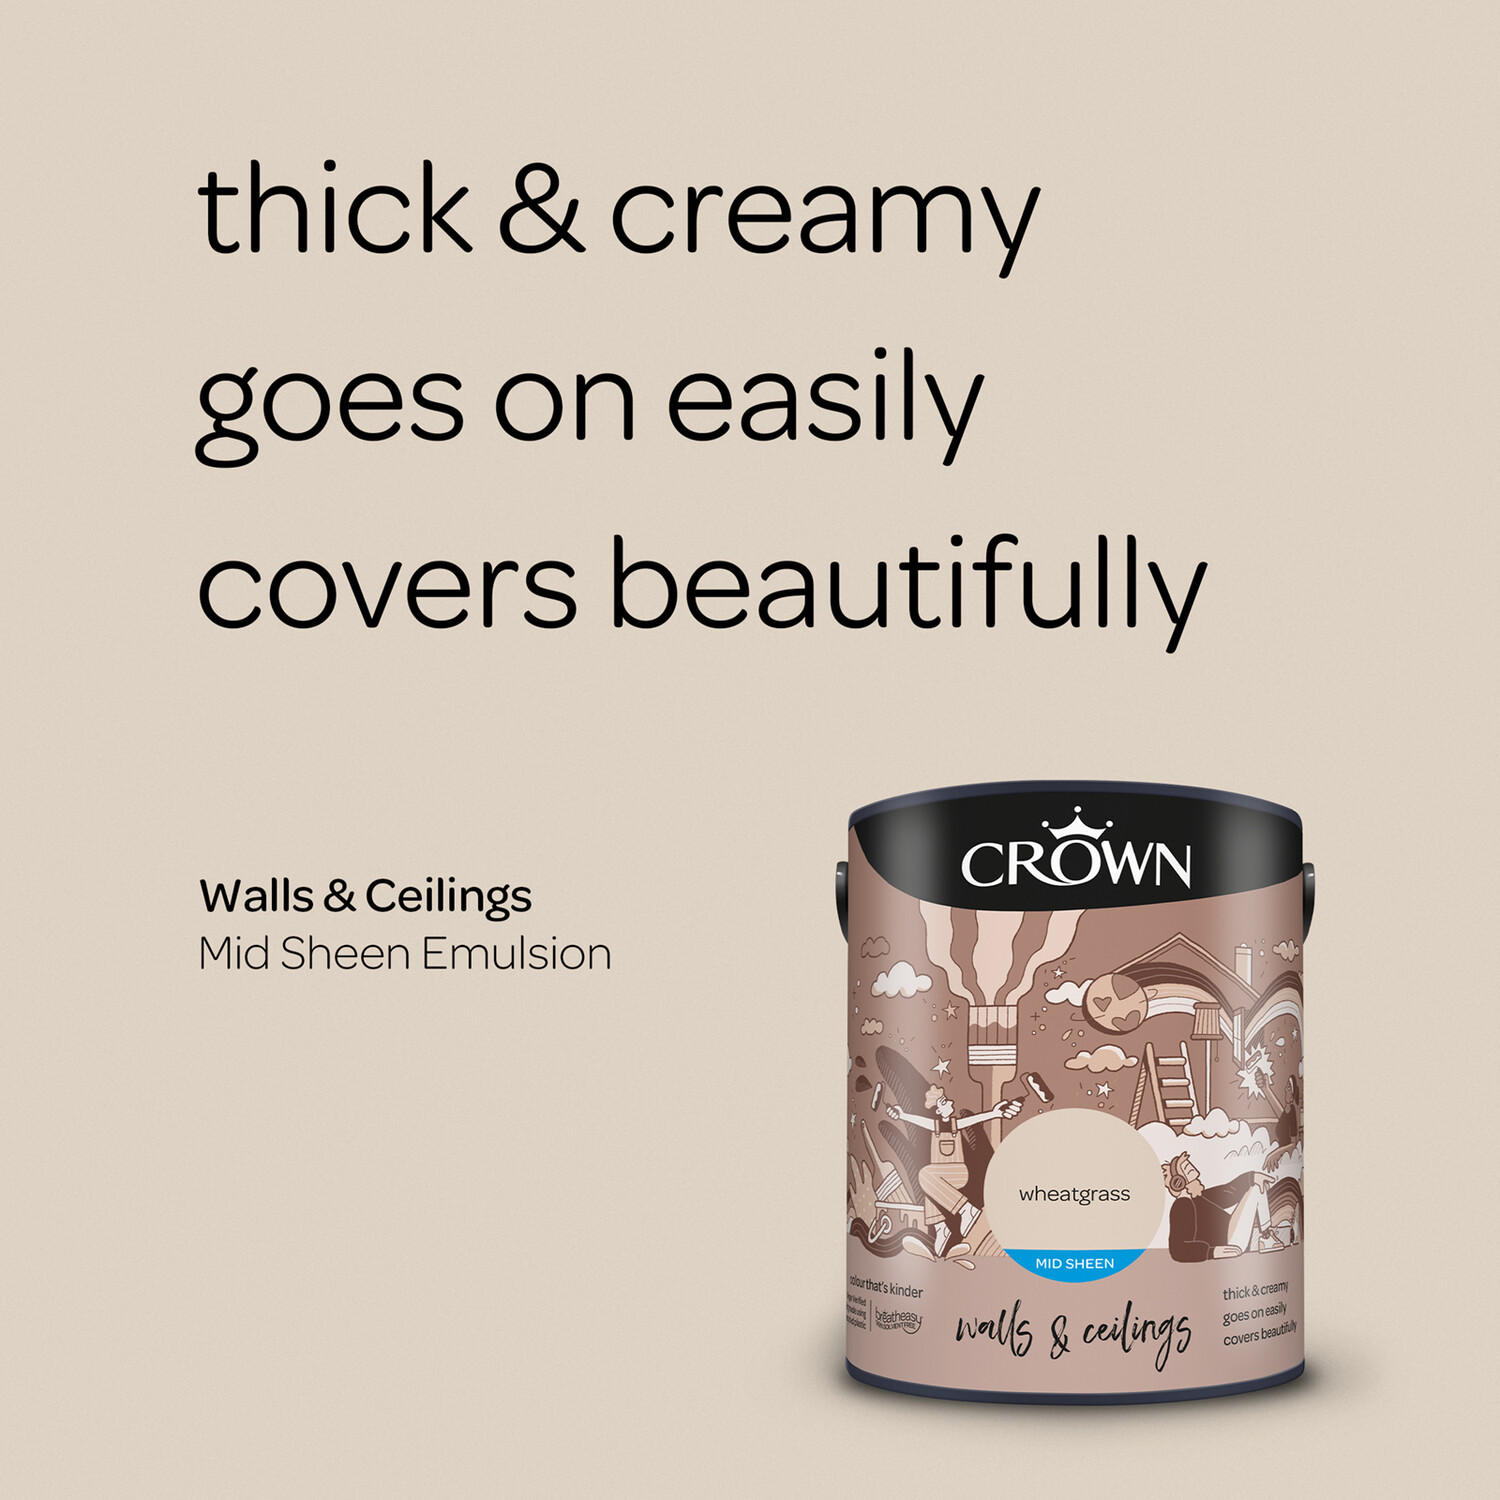 Crown Walls & Ceilings Wheatgrass Mid Sheen Emulsion Paint 5L Image 8